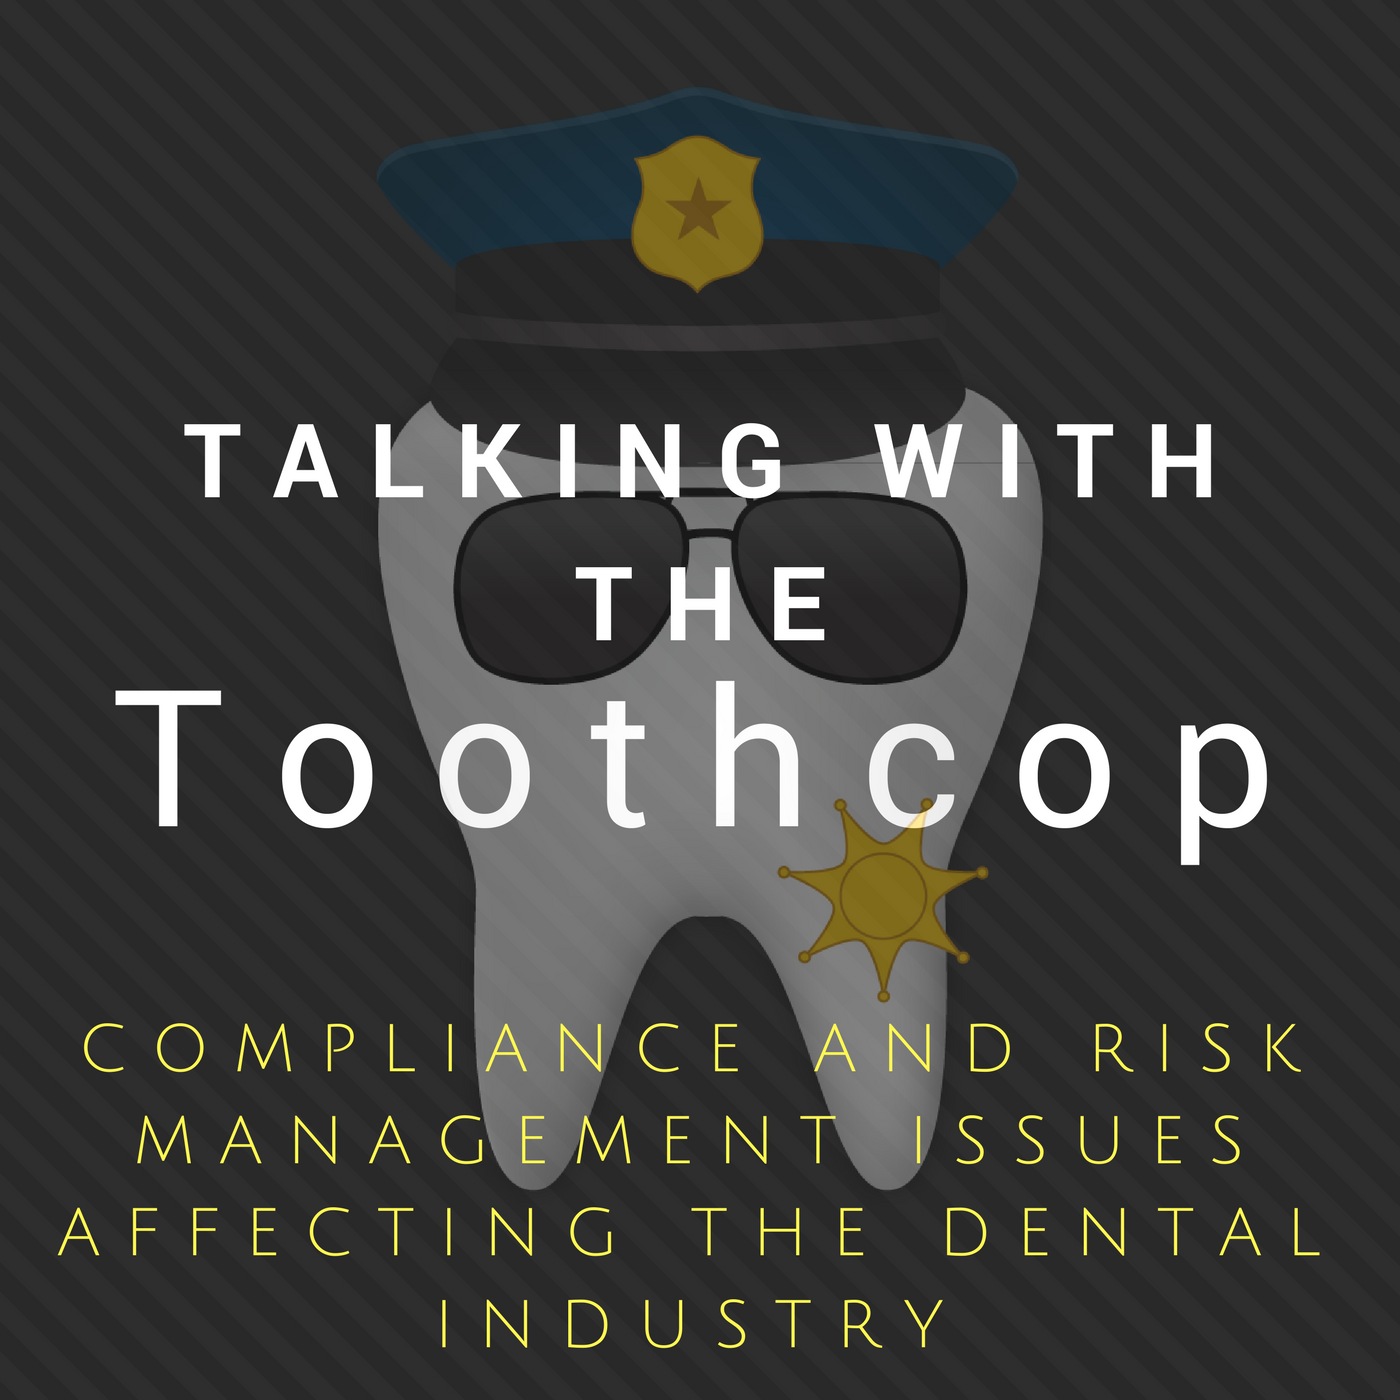 The Toothcop’s Quick Tips for Emergency Preparedness